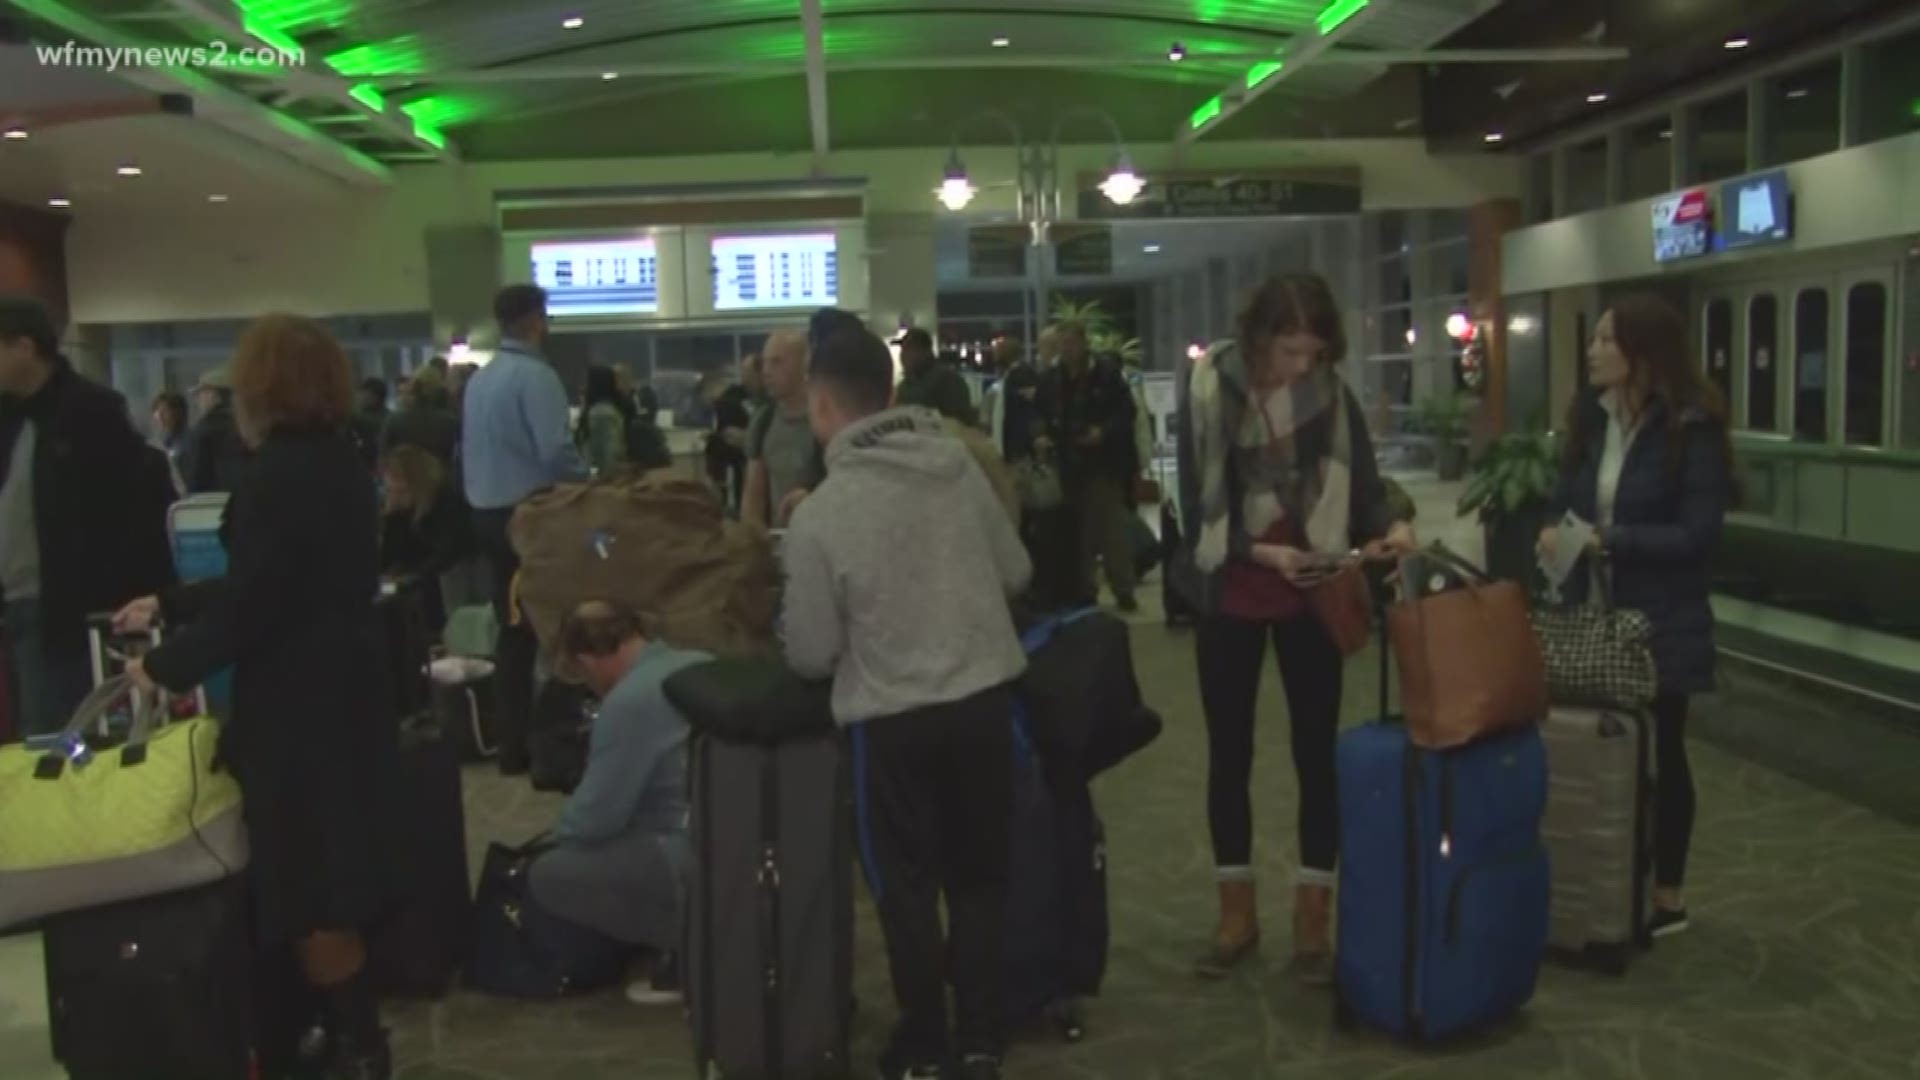 AAA says more than 6 million people will take to the sky for for the holiday season.